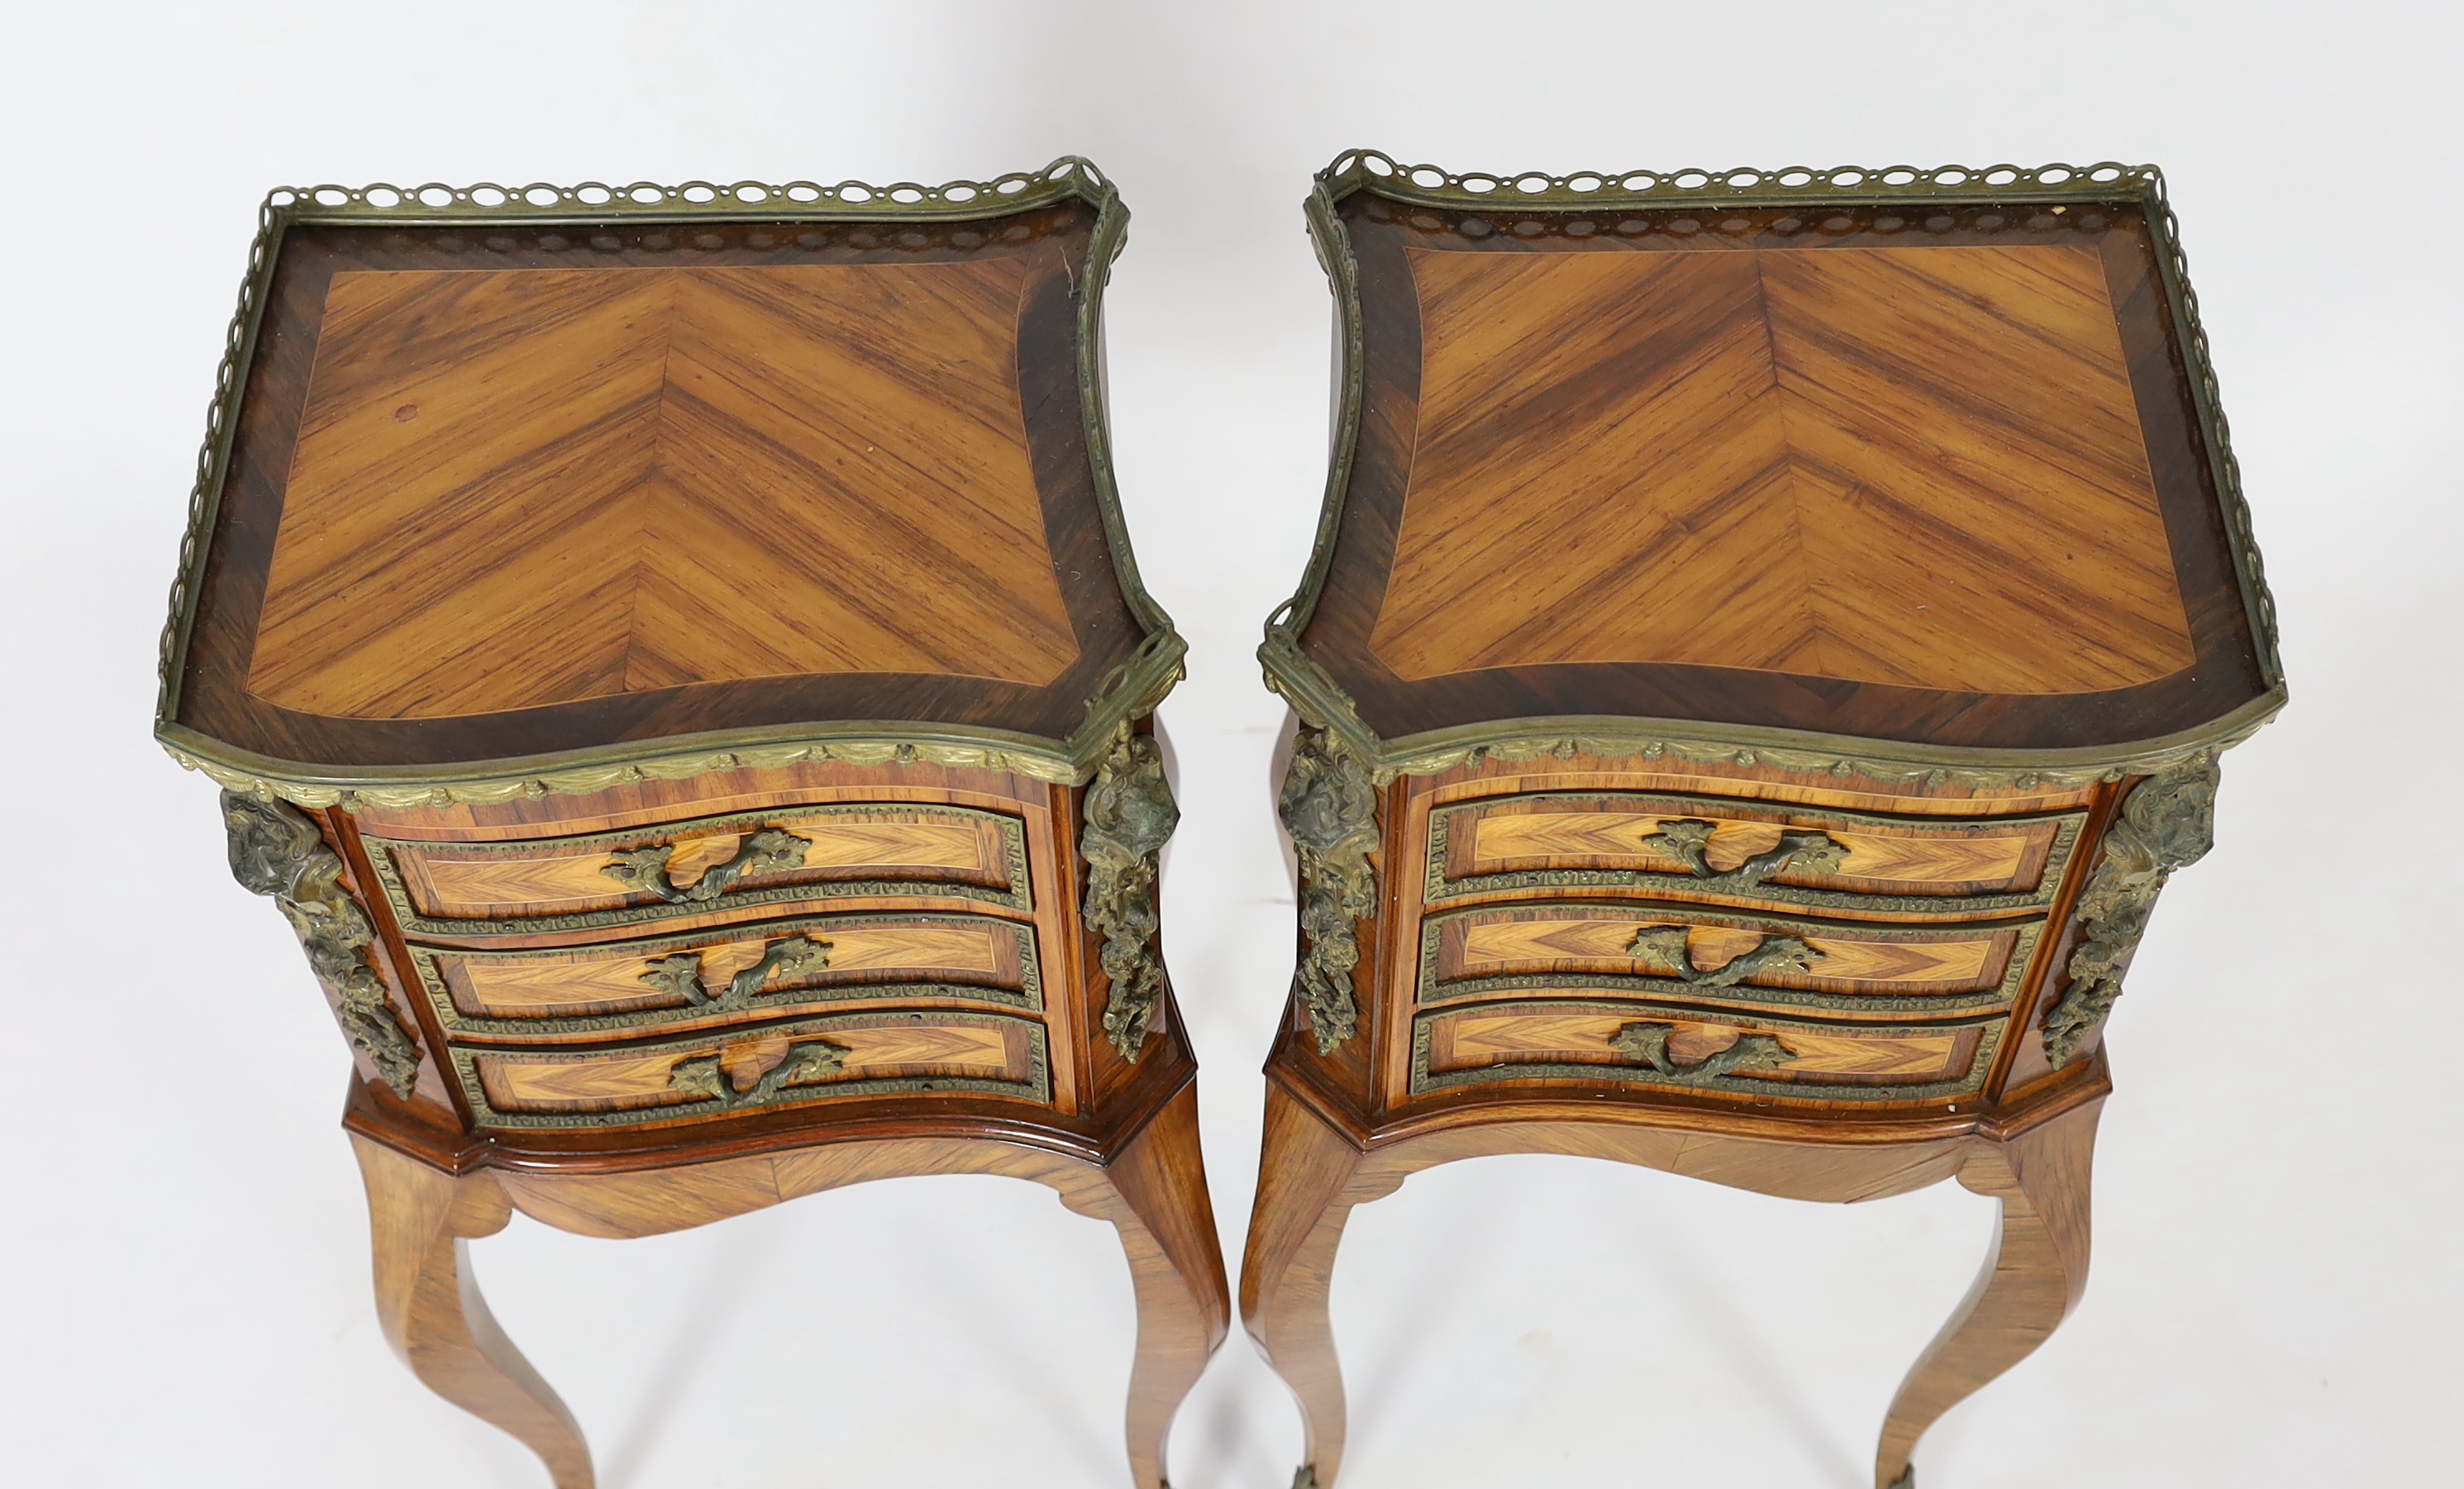 A pair of Louis XVI style ormolu mounted kingwood bedside chests, each of asymmetrical scroll form - Image 3 of 3